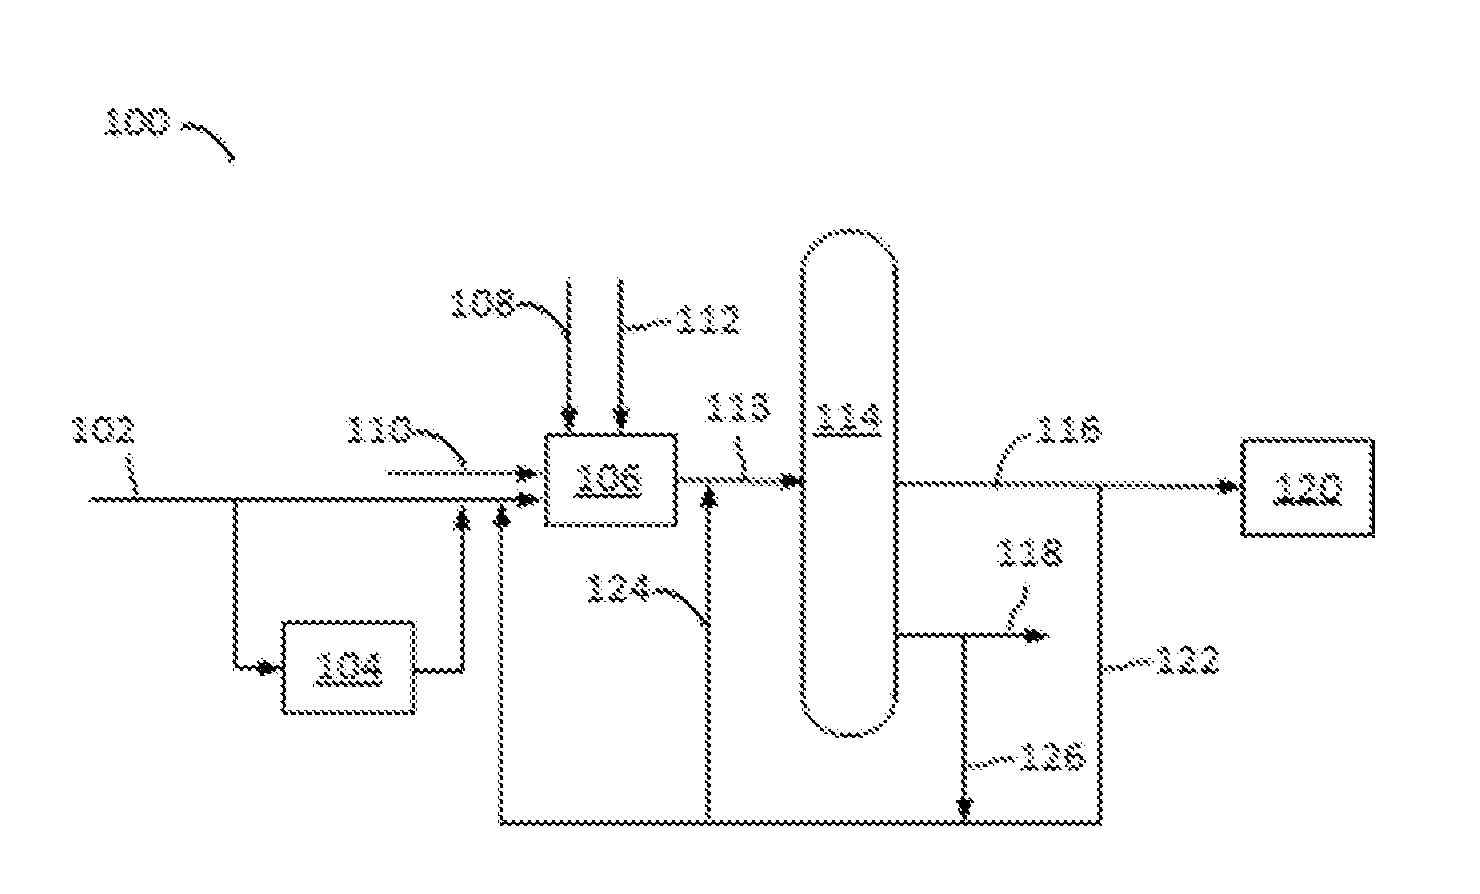 Method of Making Aromatic Hydrocarbons